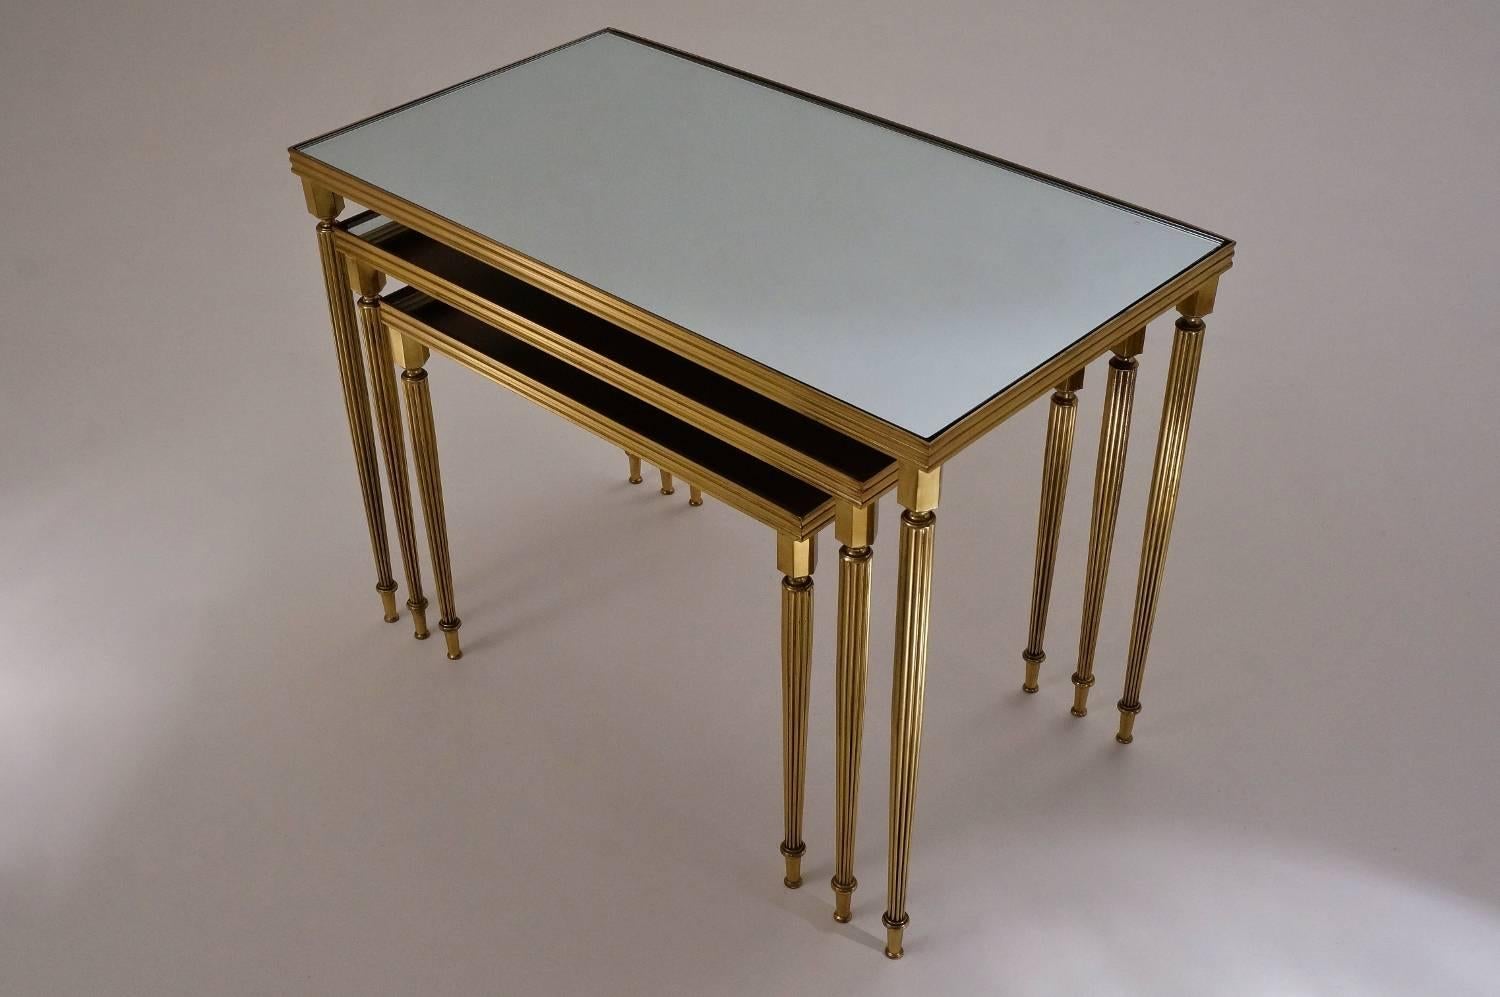 Maison Baguès nesting tables (in the style of), brass and mirror, 1969, French

This set of tables have been gently cleaned respecting the vintage patina; they are ready to use.

The neoclassical and modernist features executed in solid polished